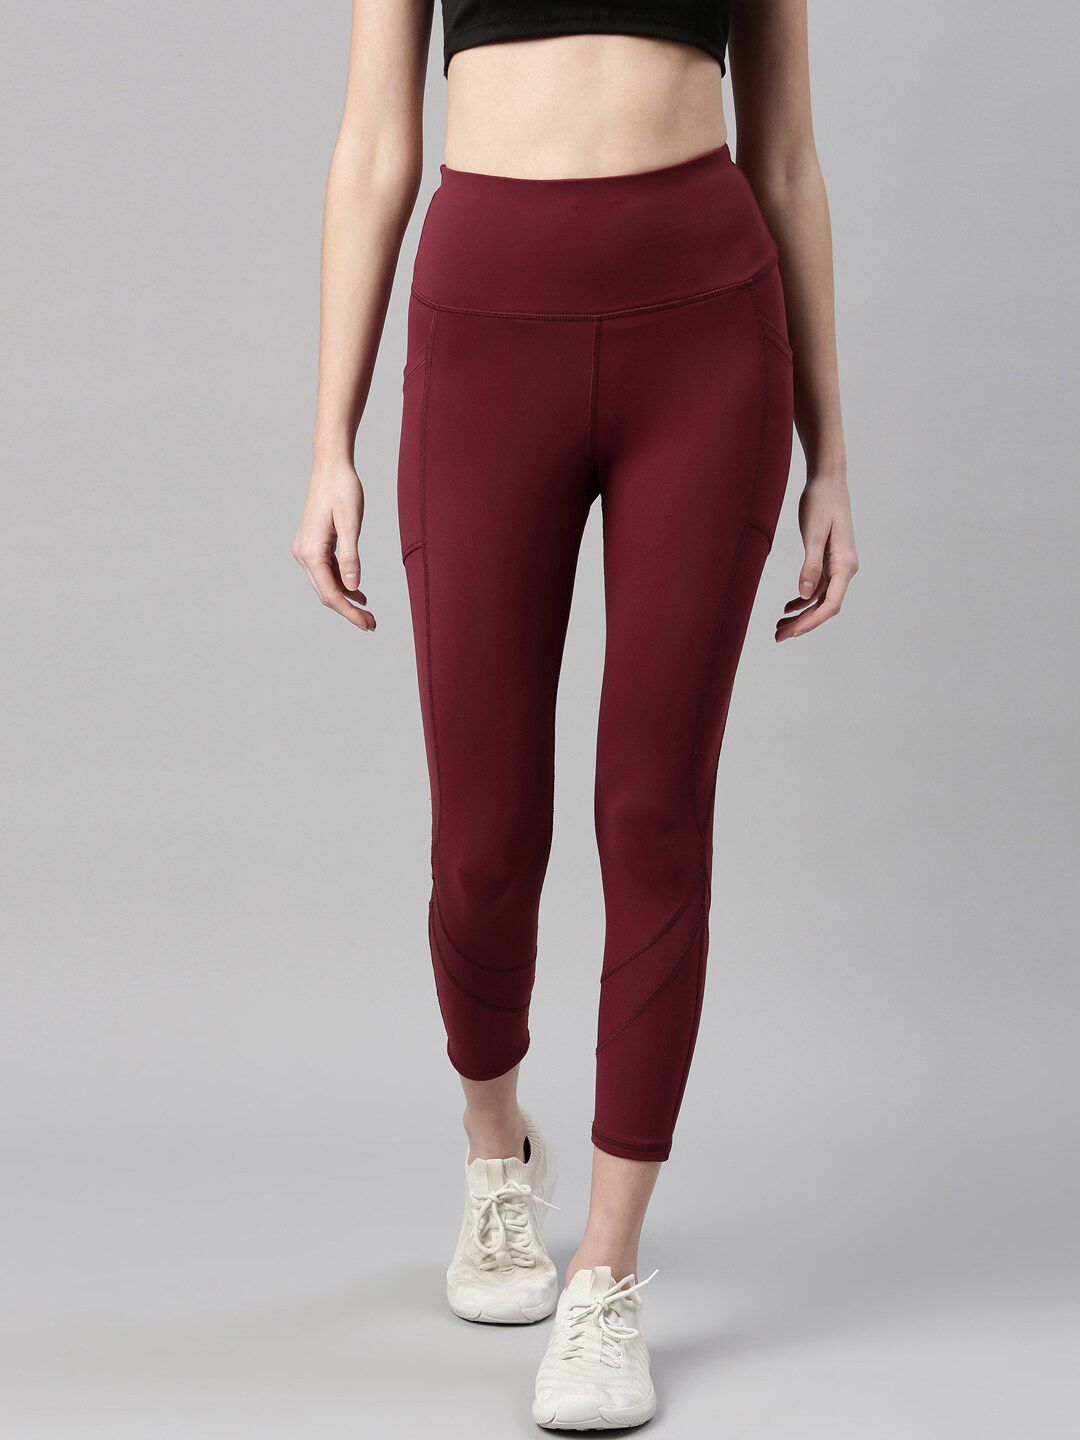 Enamor Women Plus Size Maroon Dry Fit Antimicrobial 7/8th Workout Tights Price in India